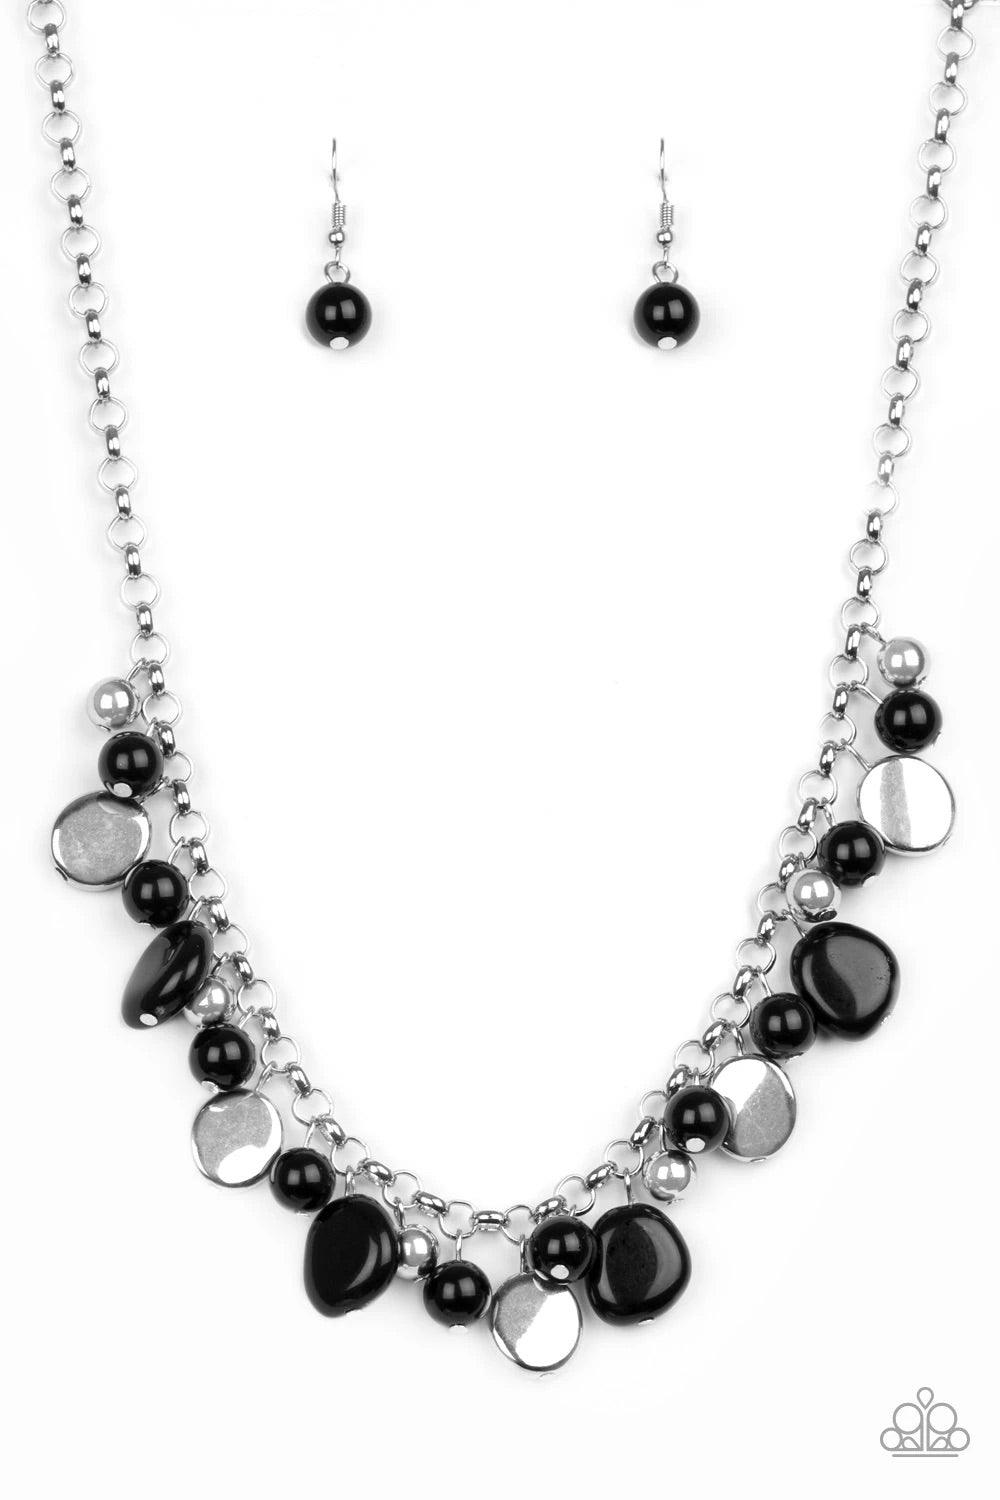 Paparazzi Accessories Flirtatiously Florida - Black Featuring round and asymmetrical shapes, shiny silver and black beads swing from the bottom of a bold silver chain, creating a flirtatious fringe below the collar. Features an adjustable clasp closure. S